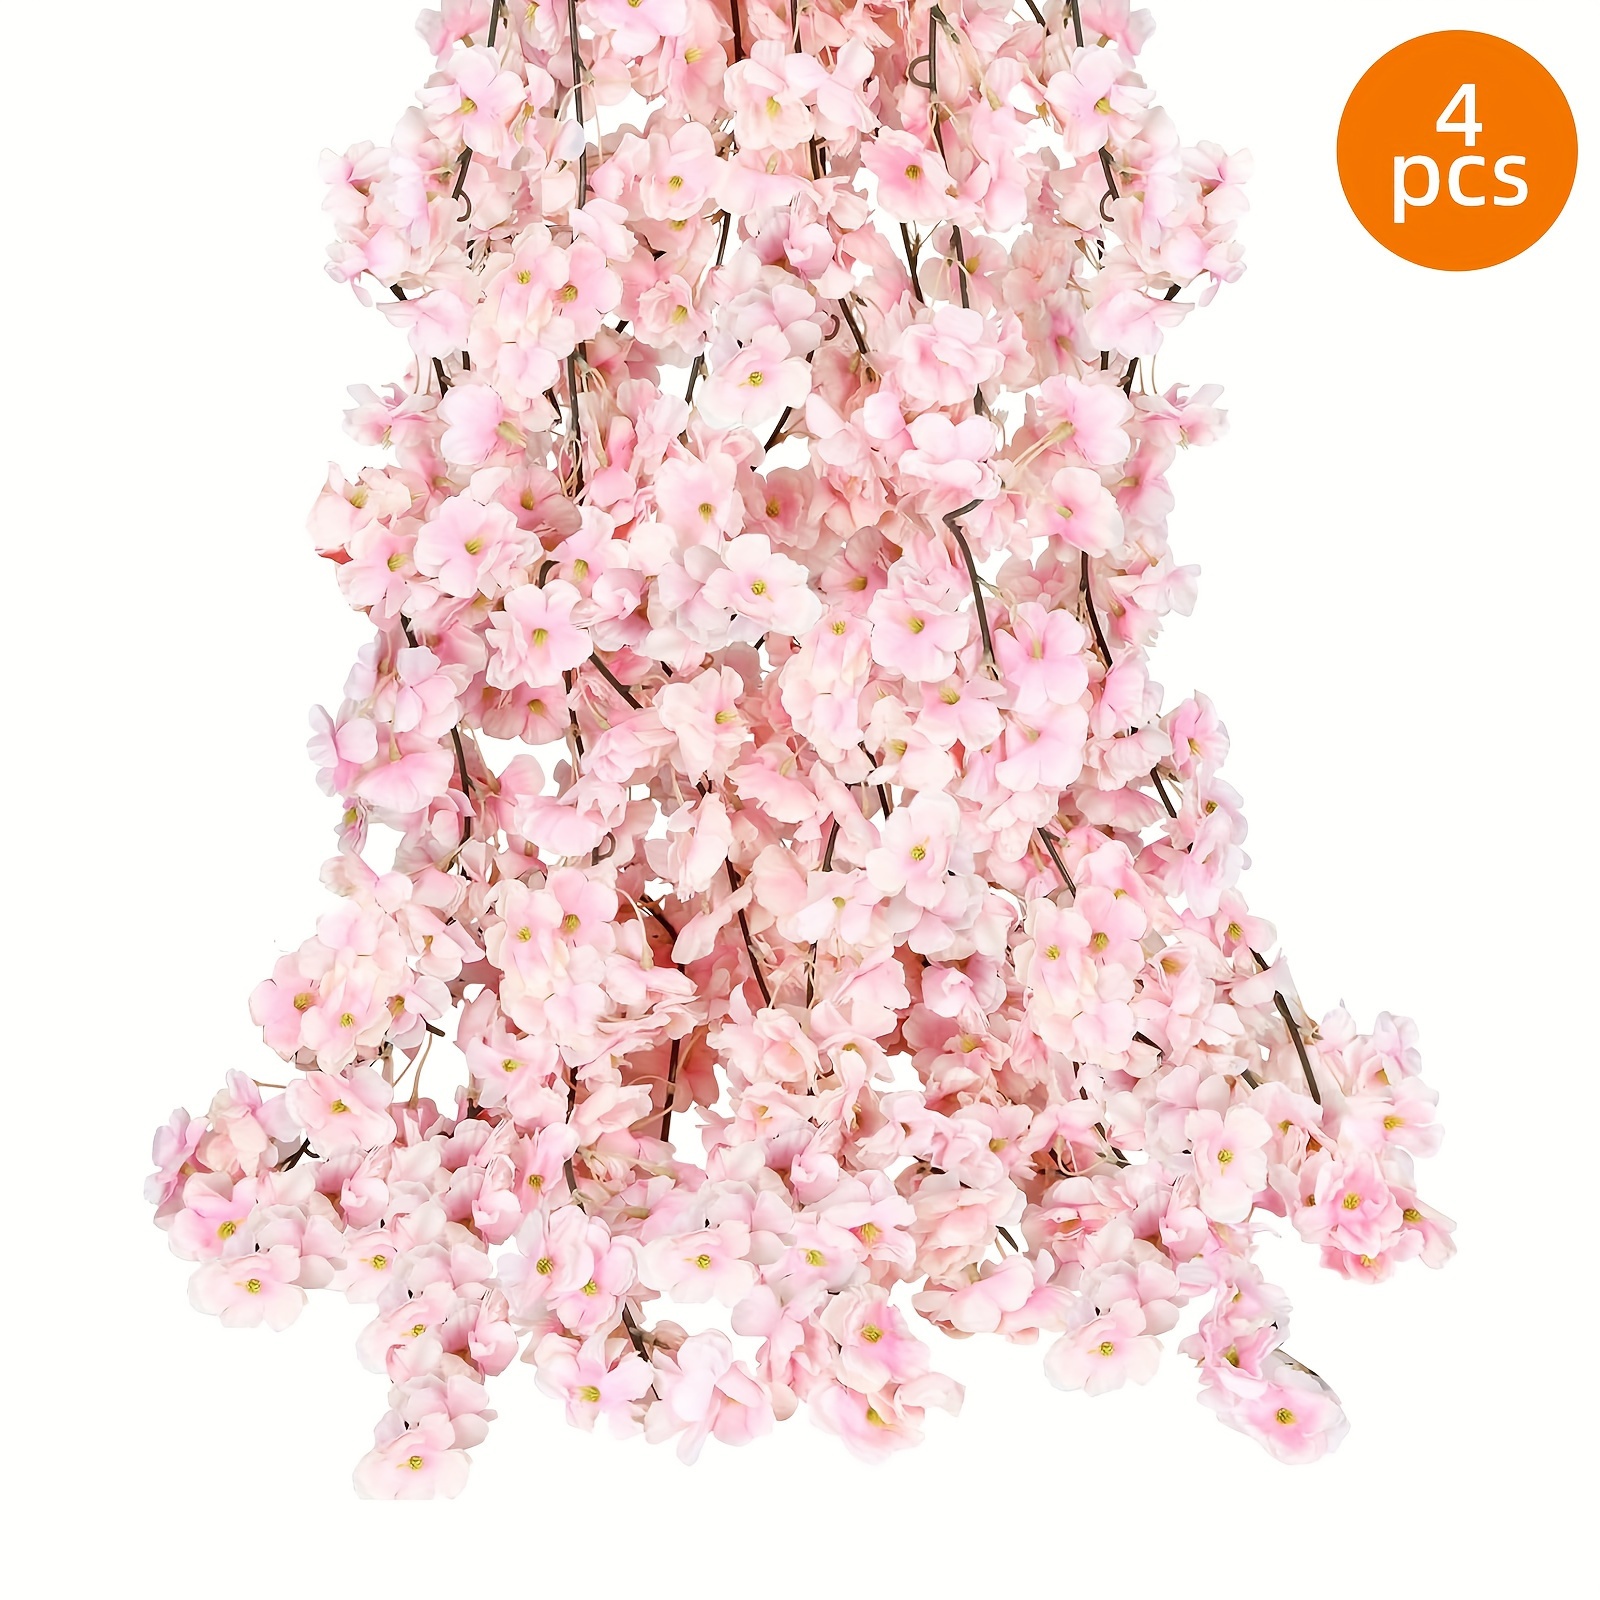 

Flower Wall, 70.87 Inches Hanging Artificial Flowers, 4pcs Artificial Cherry Flower, Vines Artificial Flowers Outdoor Hanging Silk Flowers, Garland For Wedding Party Home Bedroom Decor, Kawaii Cute